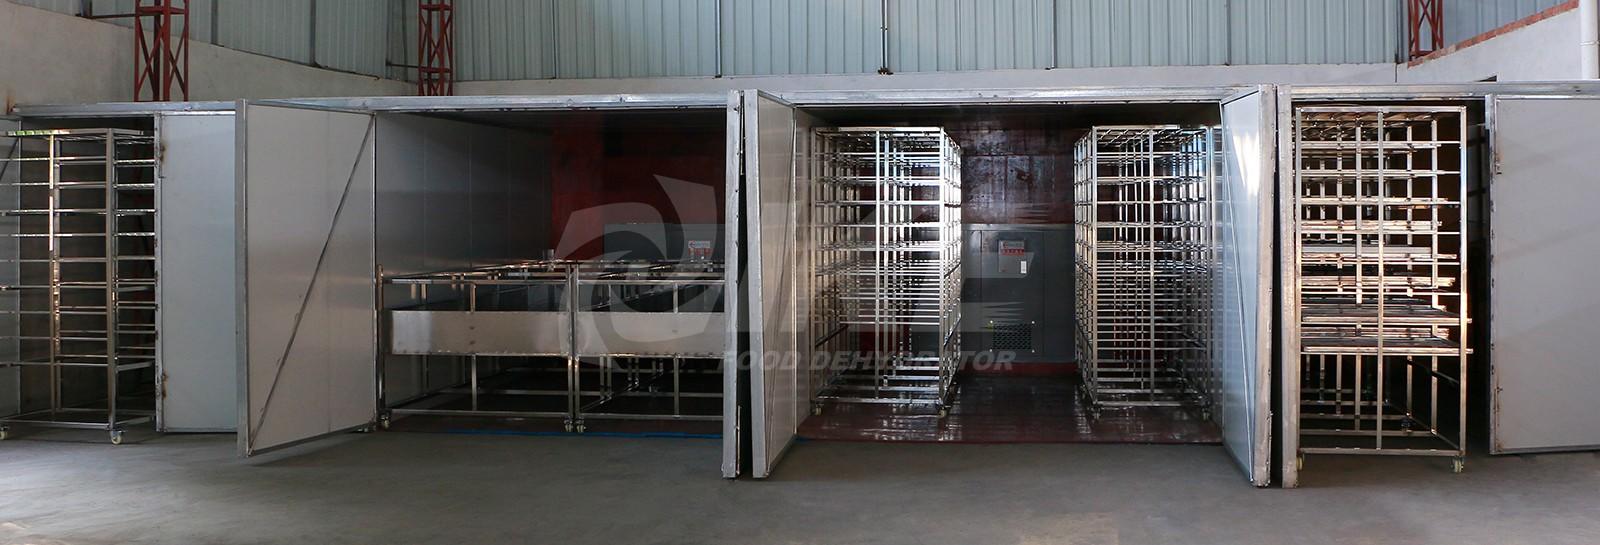 IKE professional industrial drying equipment middle for vegetable